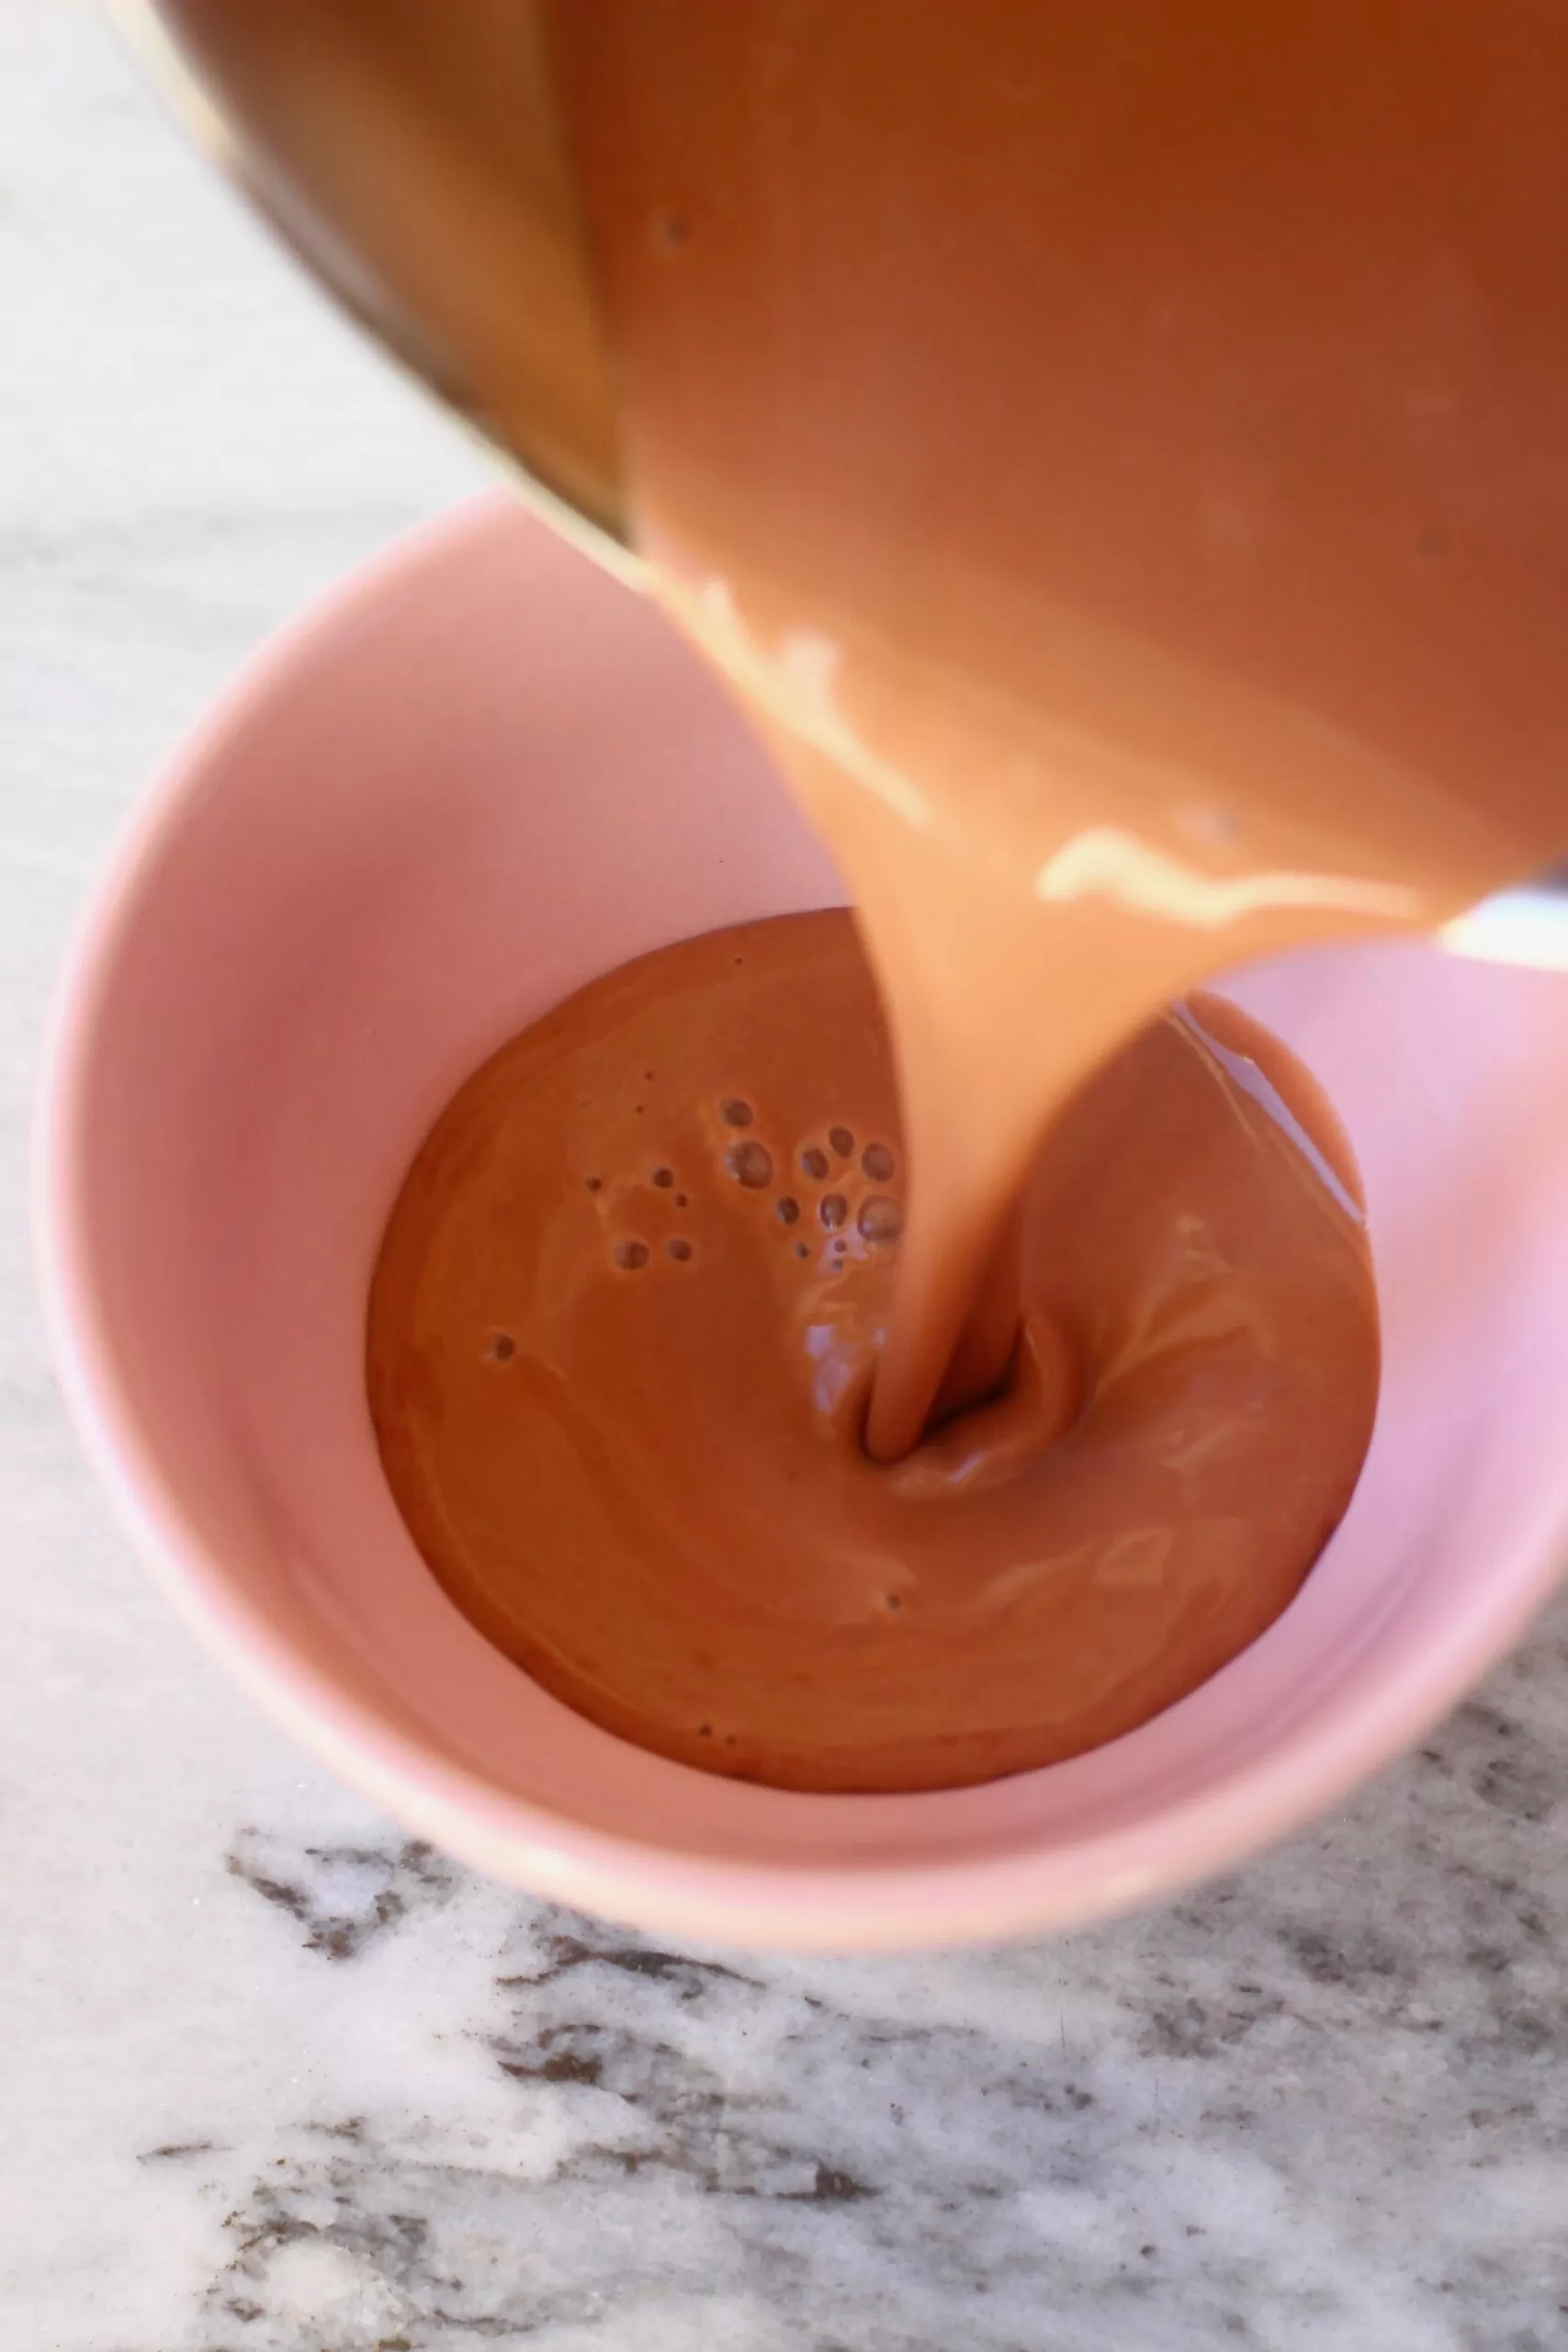 A saucepan pouring hot chocolate into a small pink bowl against a marble background